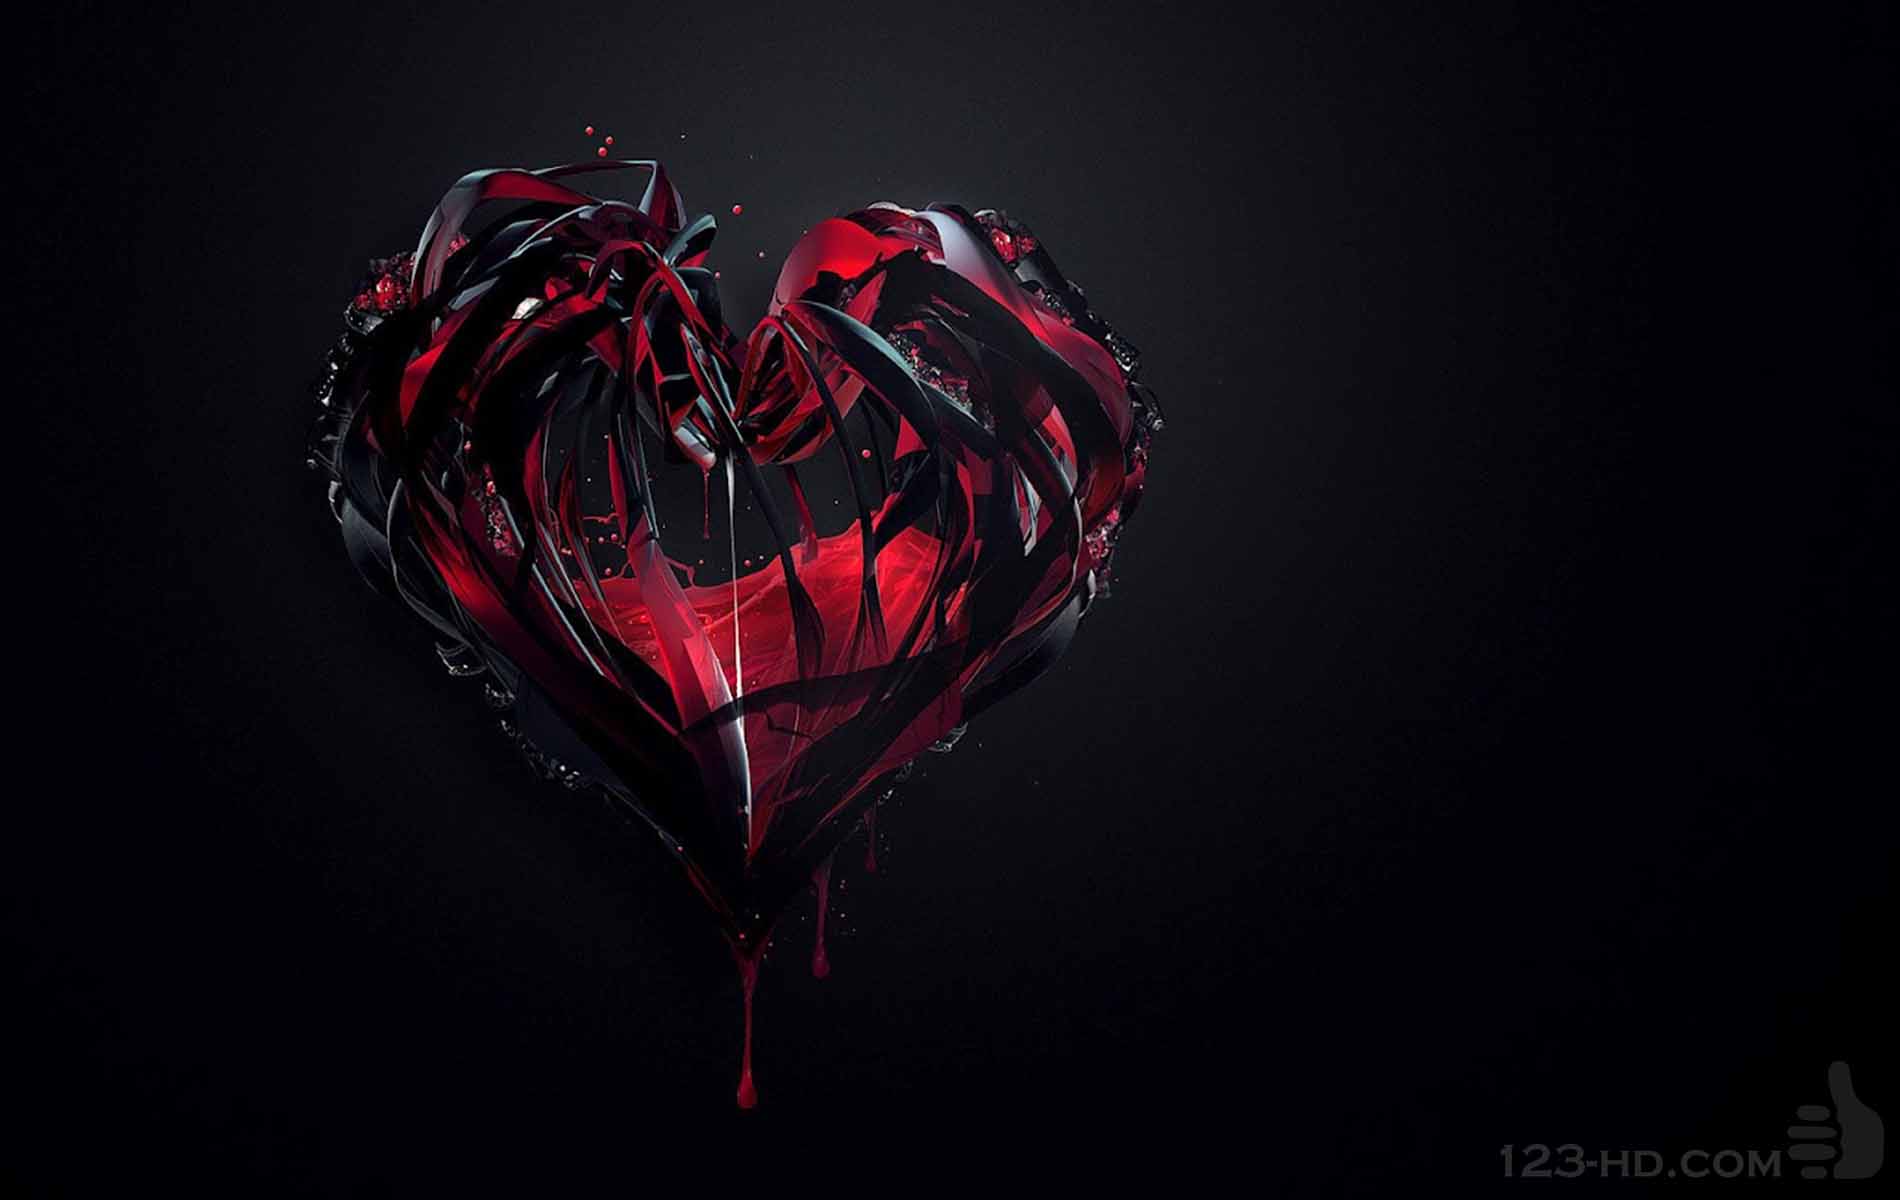 Red Heart With Black Backgrounds - Wallpaper Cave